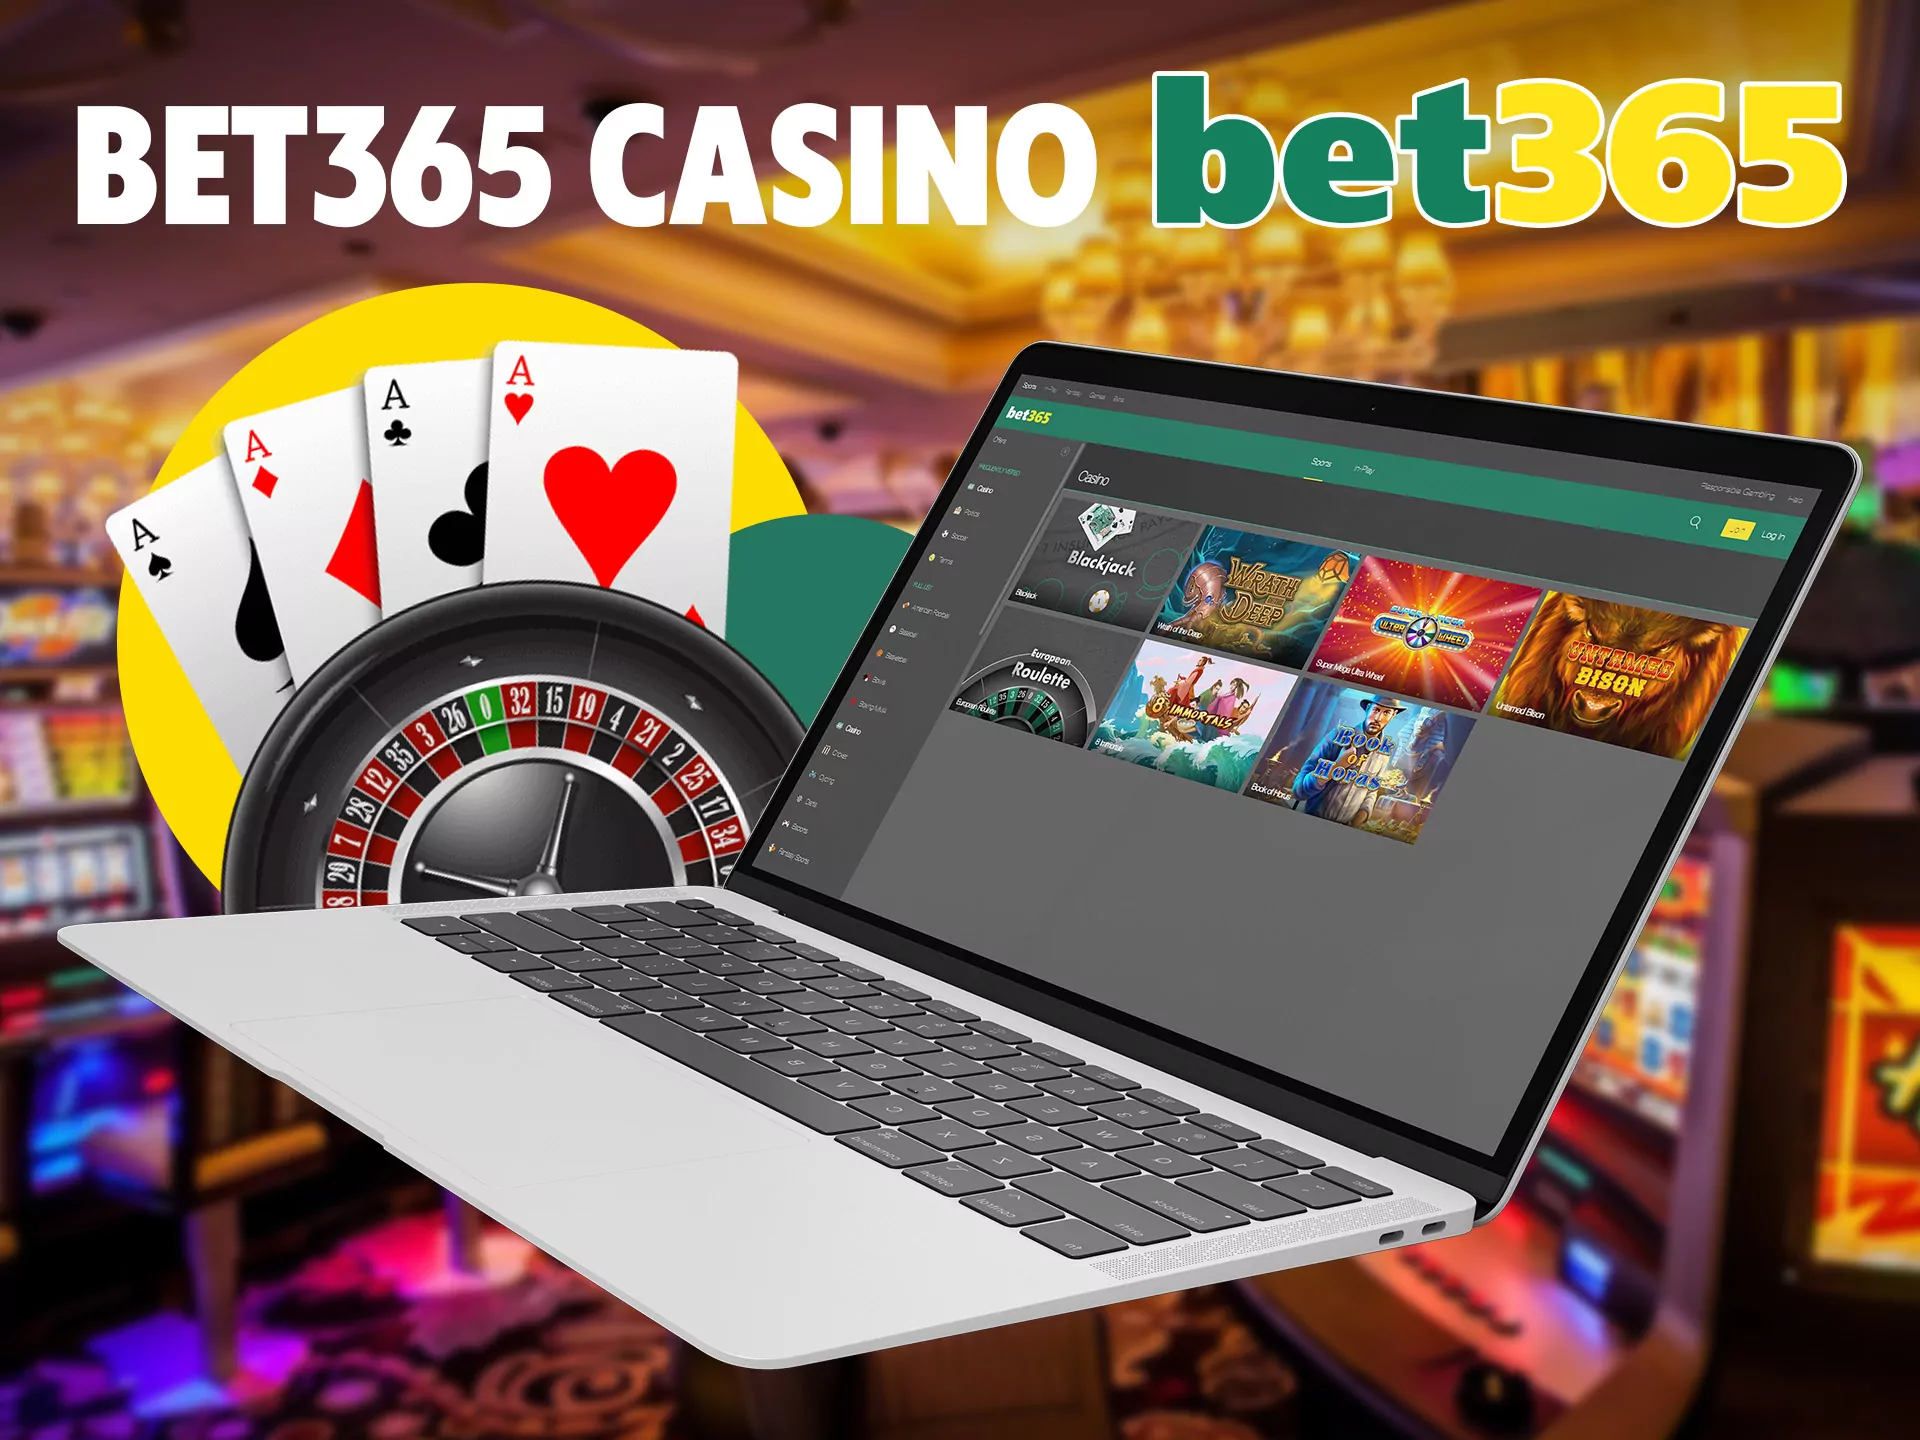 You can find any game in Bet365 casino.